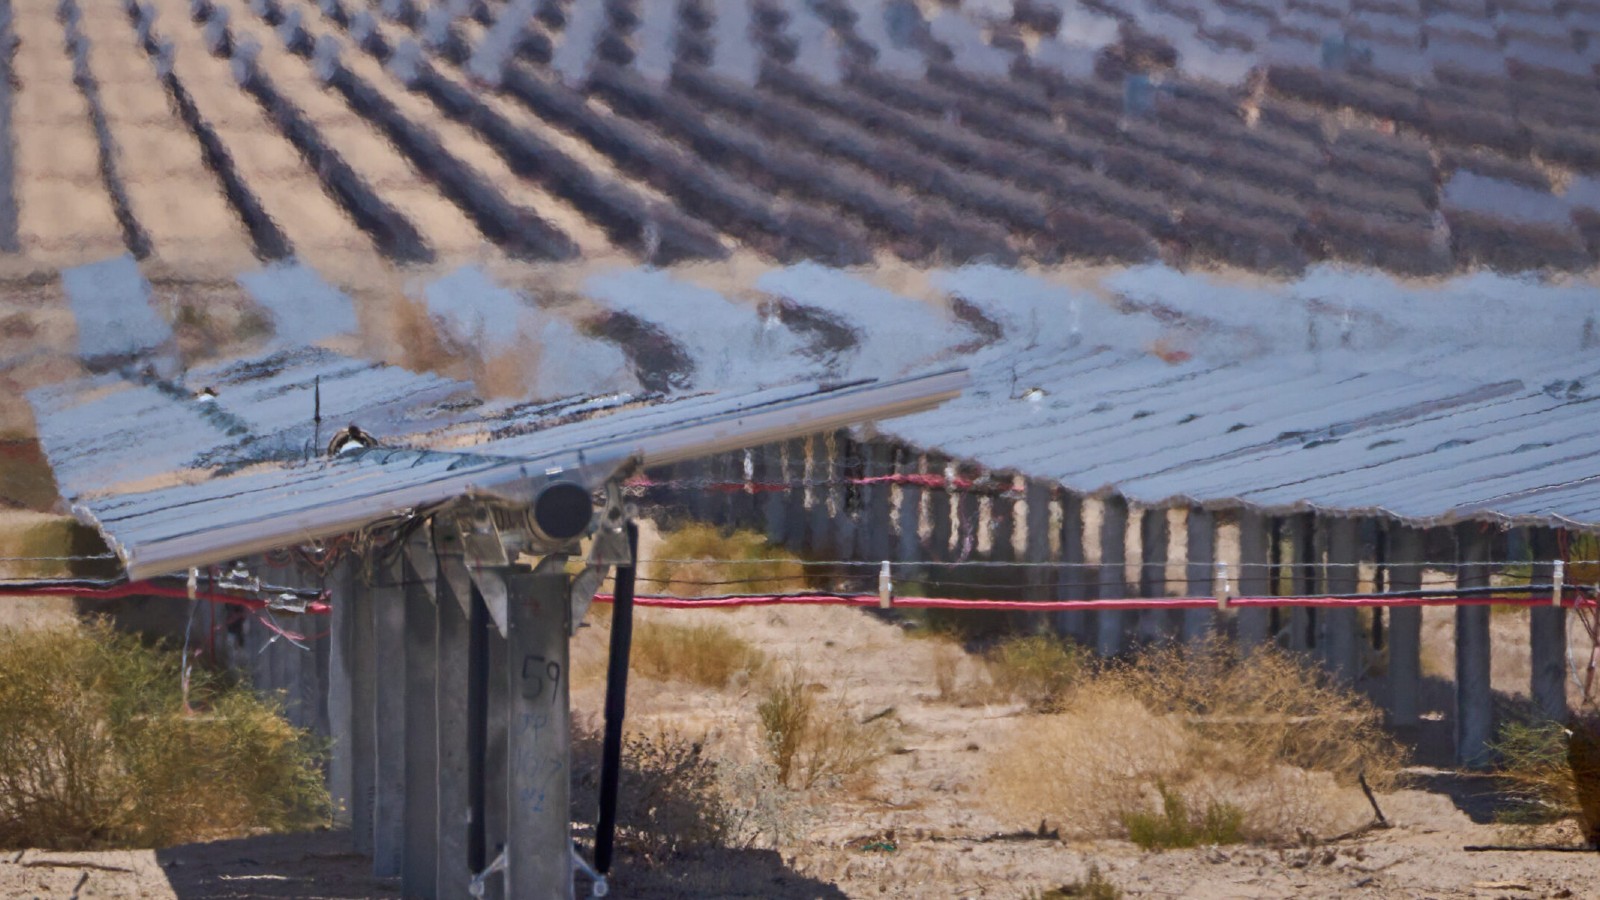 A hazy field of solar panels pointing at the sky in the desert.